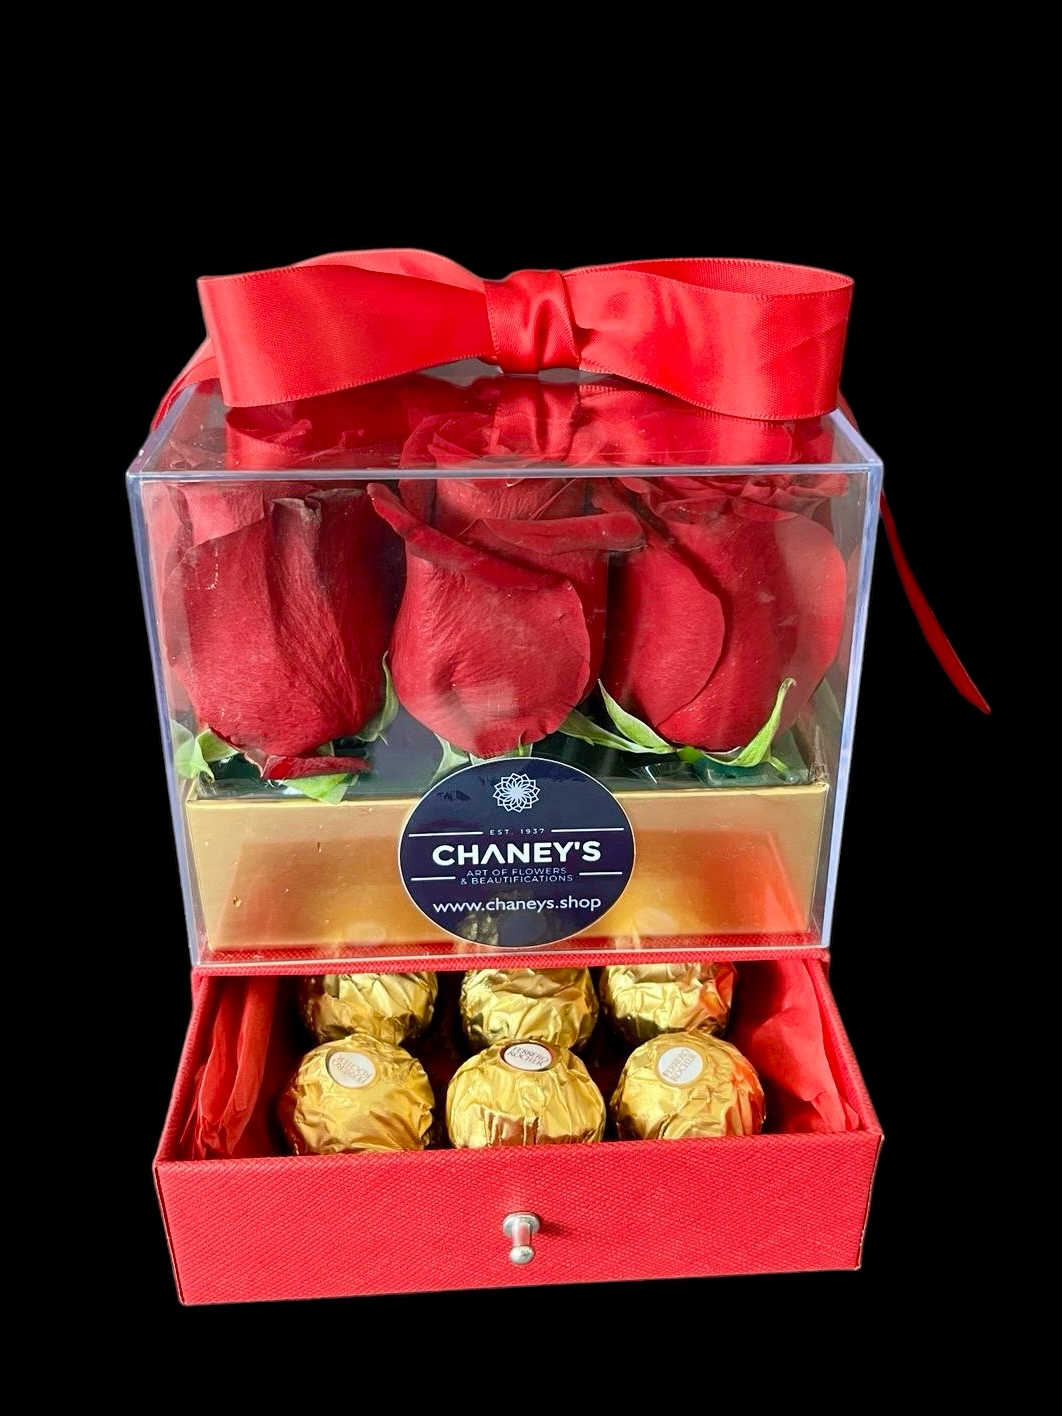 Chaney´s Double Surprise Box of Roses - Very unique love box full of fresh cut roses with a little sweets drawer loaded with Ferrero Rocher.  